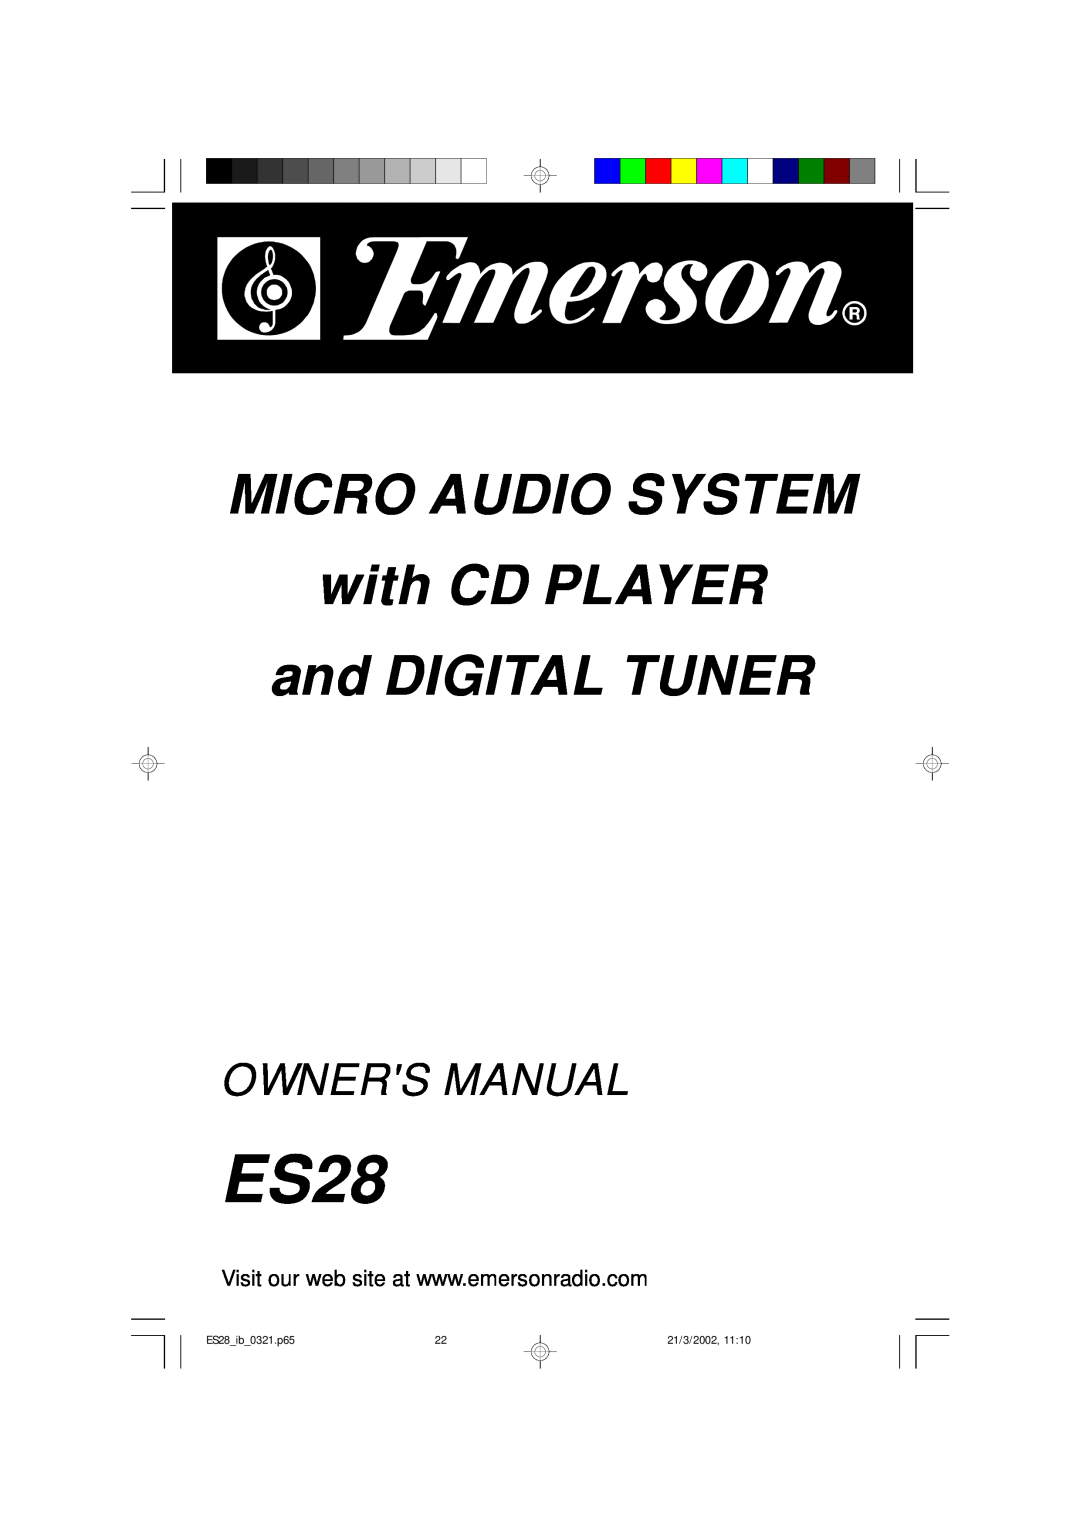 Emerson owner manual MICRO AUDIO SYSTEM with CD PLAYER, and DIGITAL TUNER, ES28 ib 0321.p65, 21/3/2002 